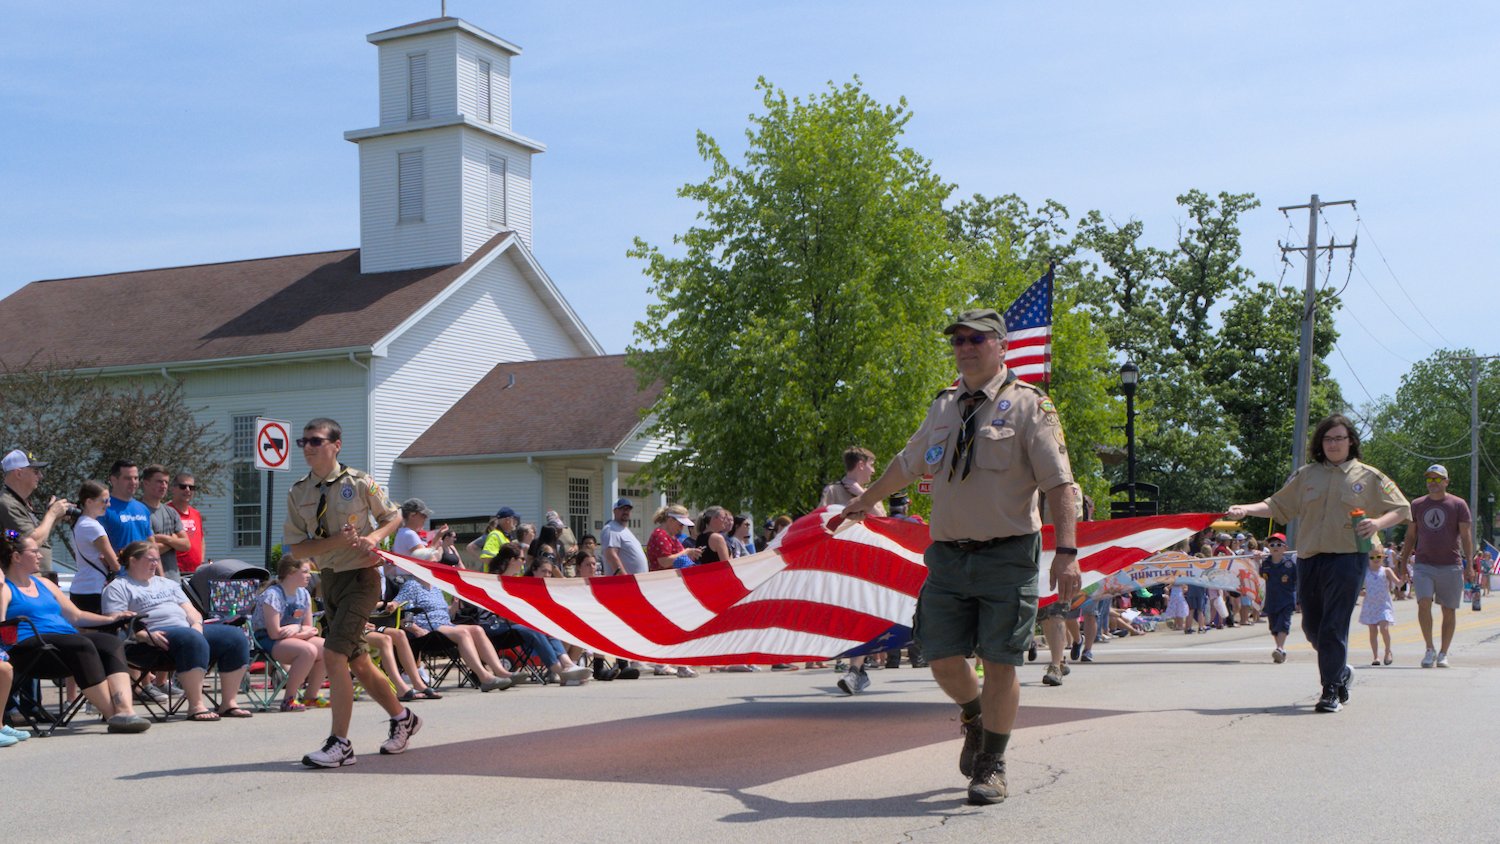 Scouts carrying large U.S. flag.